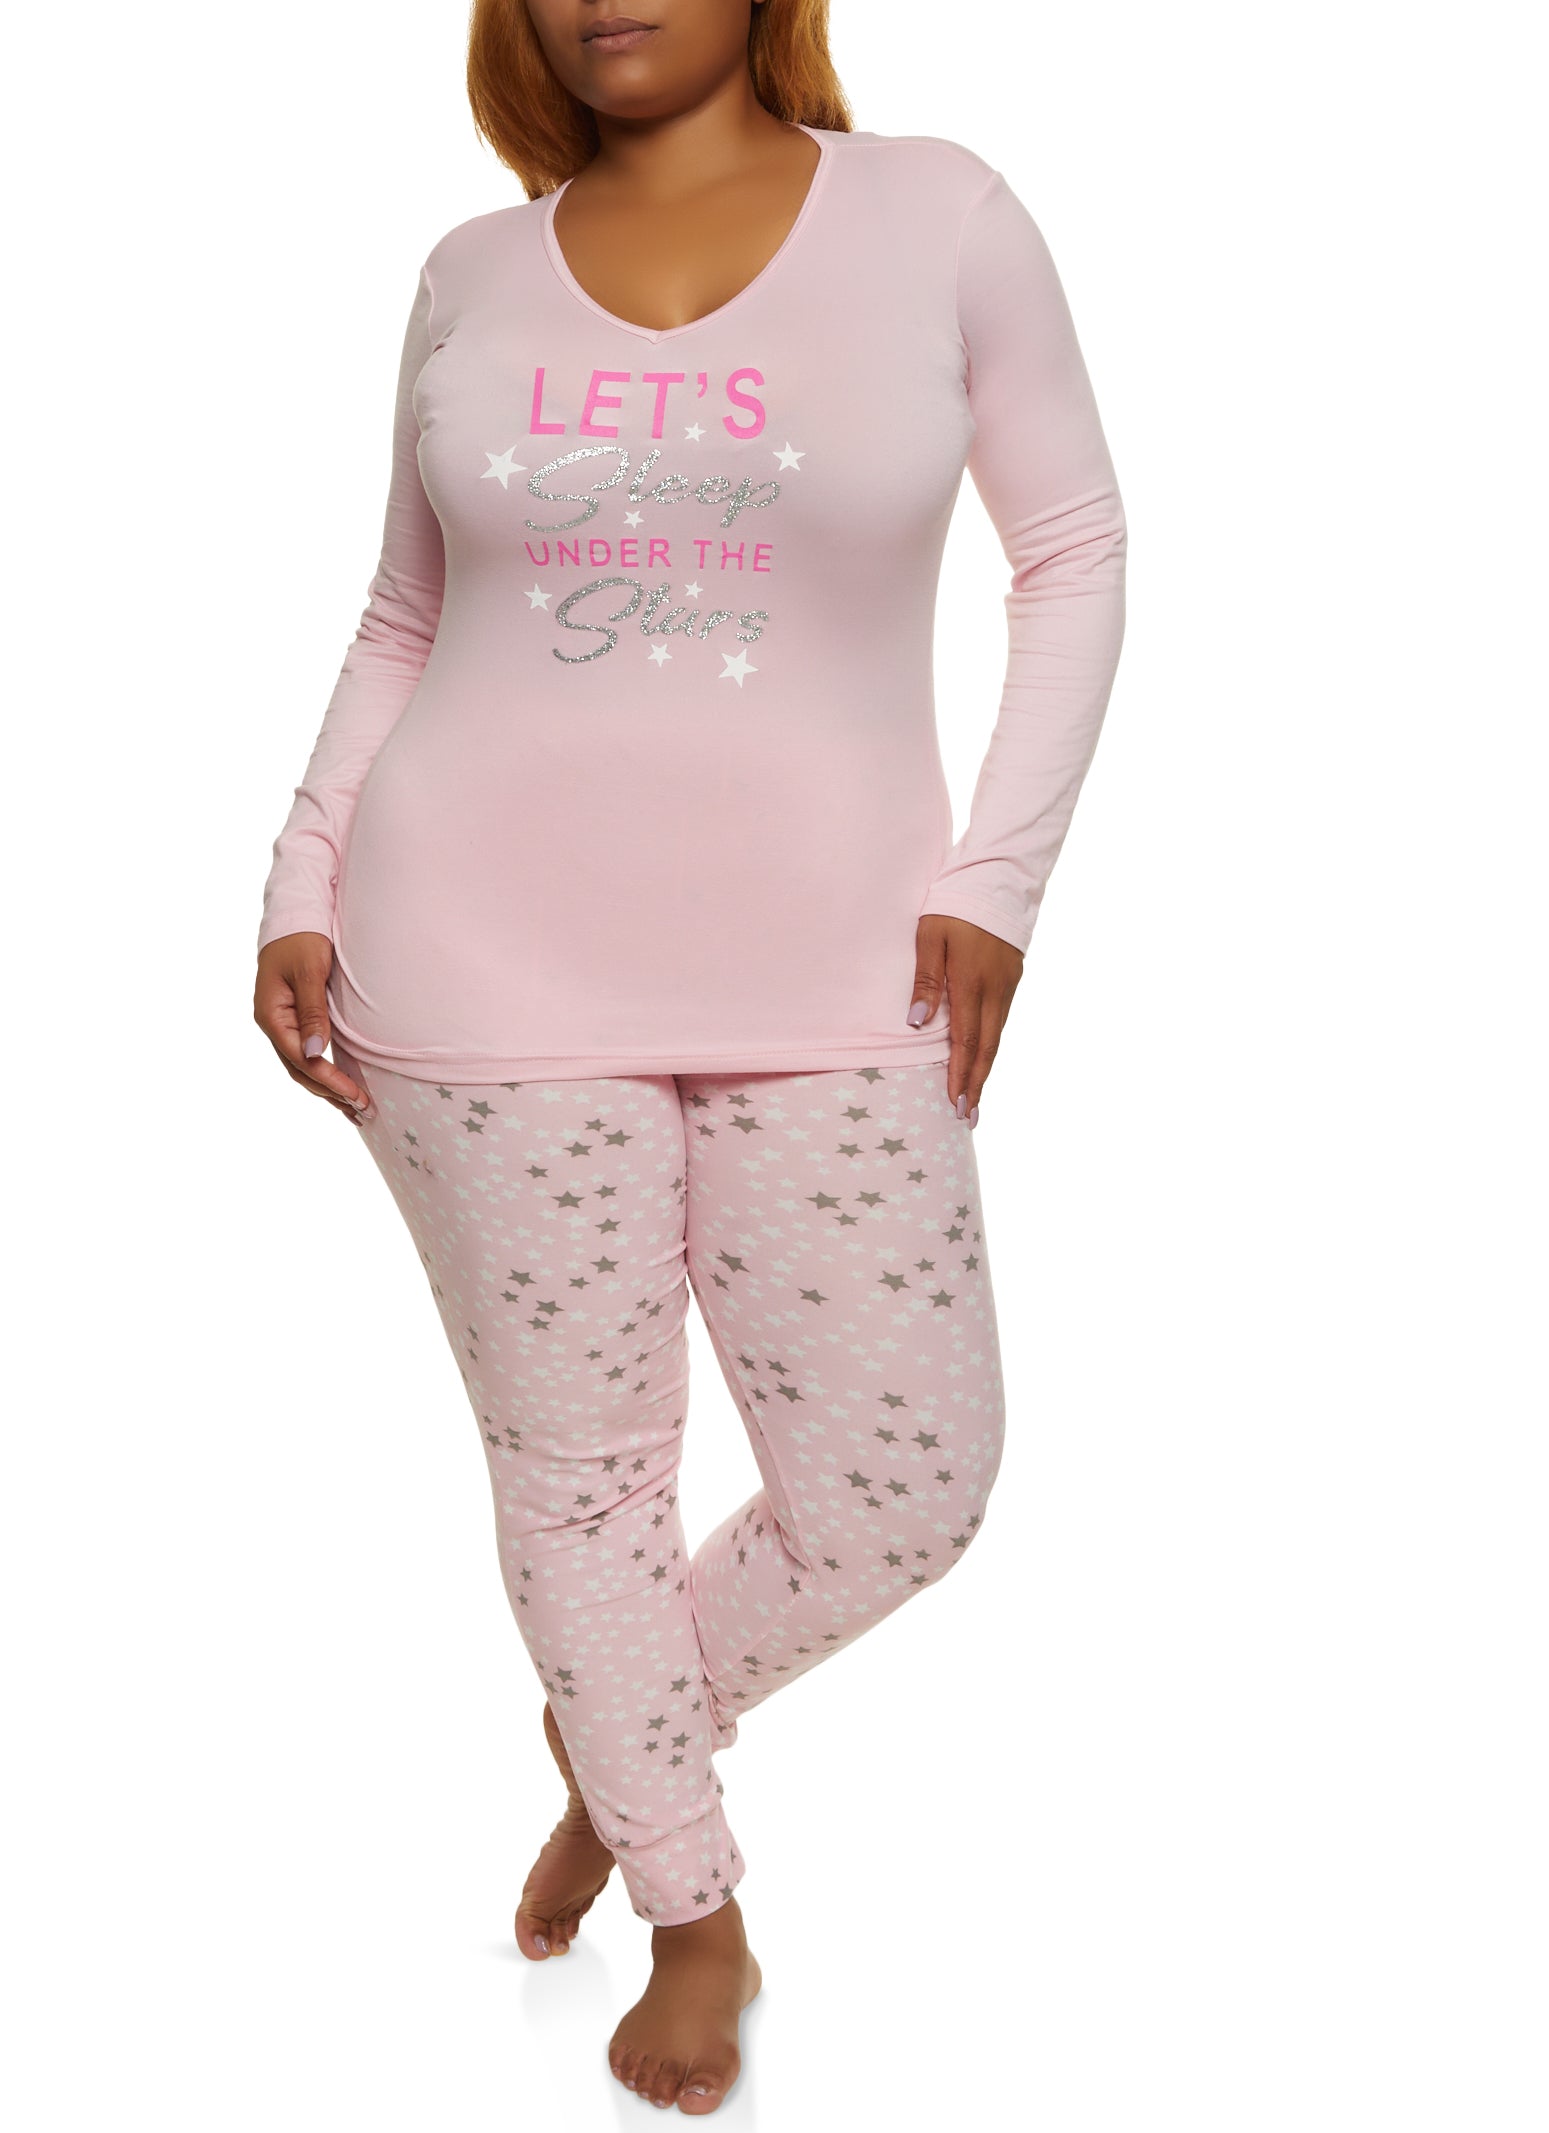 Plus Size Under The Stars Graphic Pajama Top and Pants - Pink